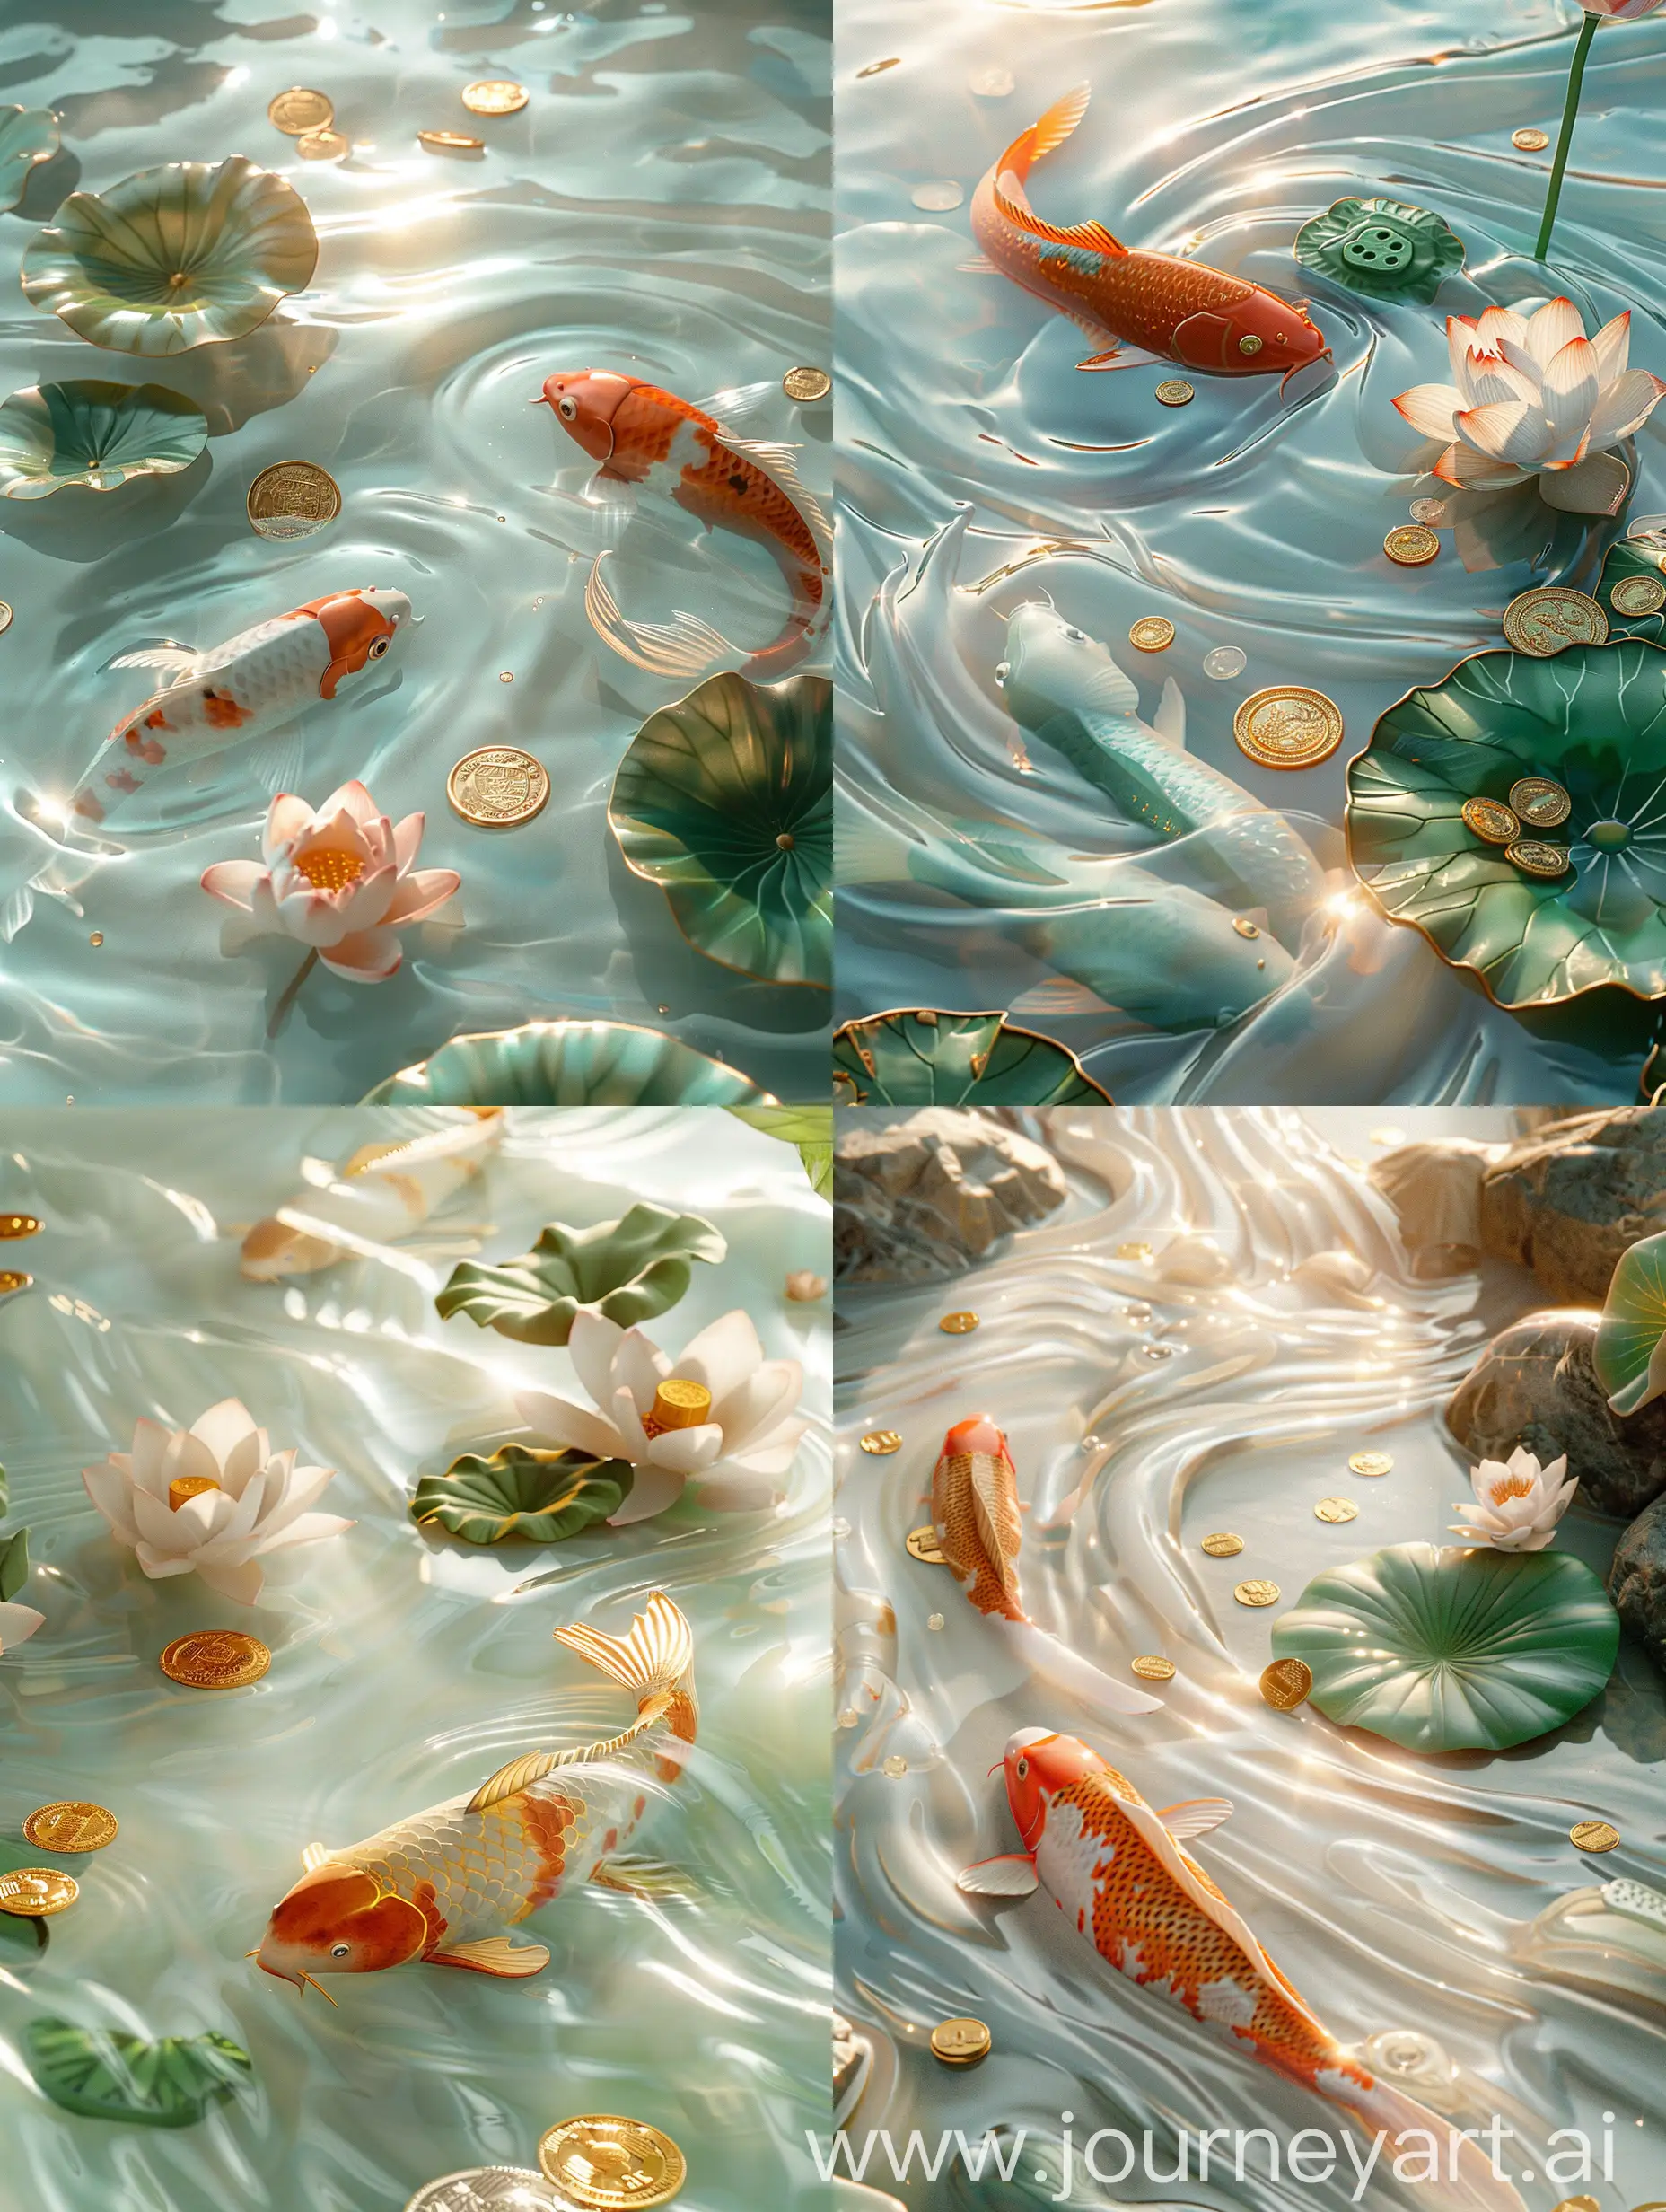 Surreal-Film-Scene-Koi-Fish-Lotus-Flowers-and-Gold-Coins-in-Flowing-Water